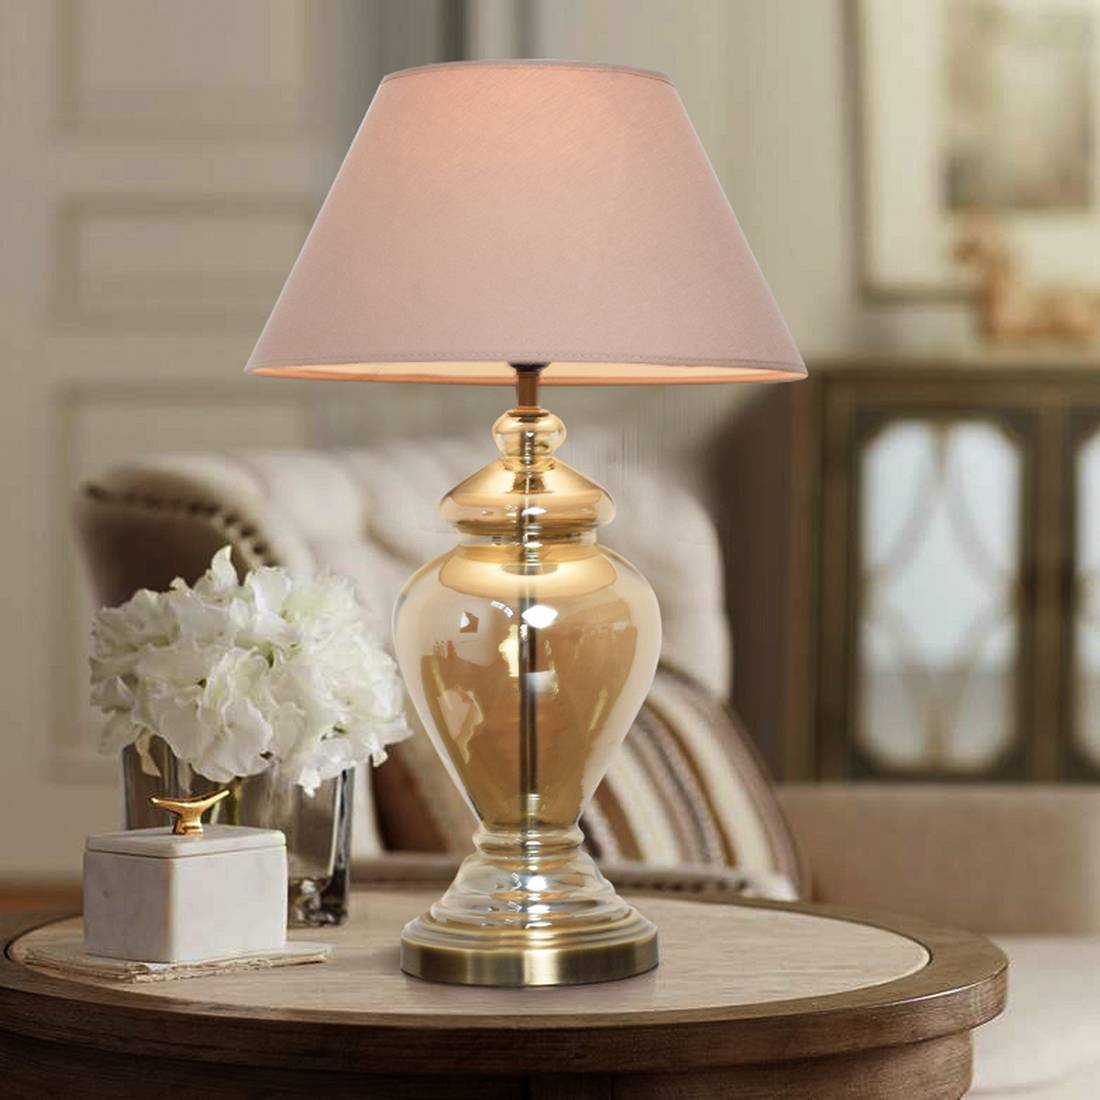 Table Lamp Lamps, Luxury Table Lamps India